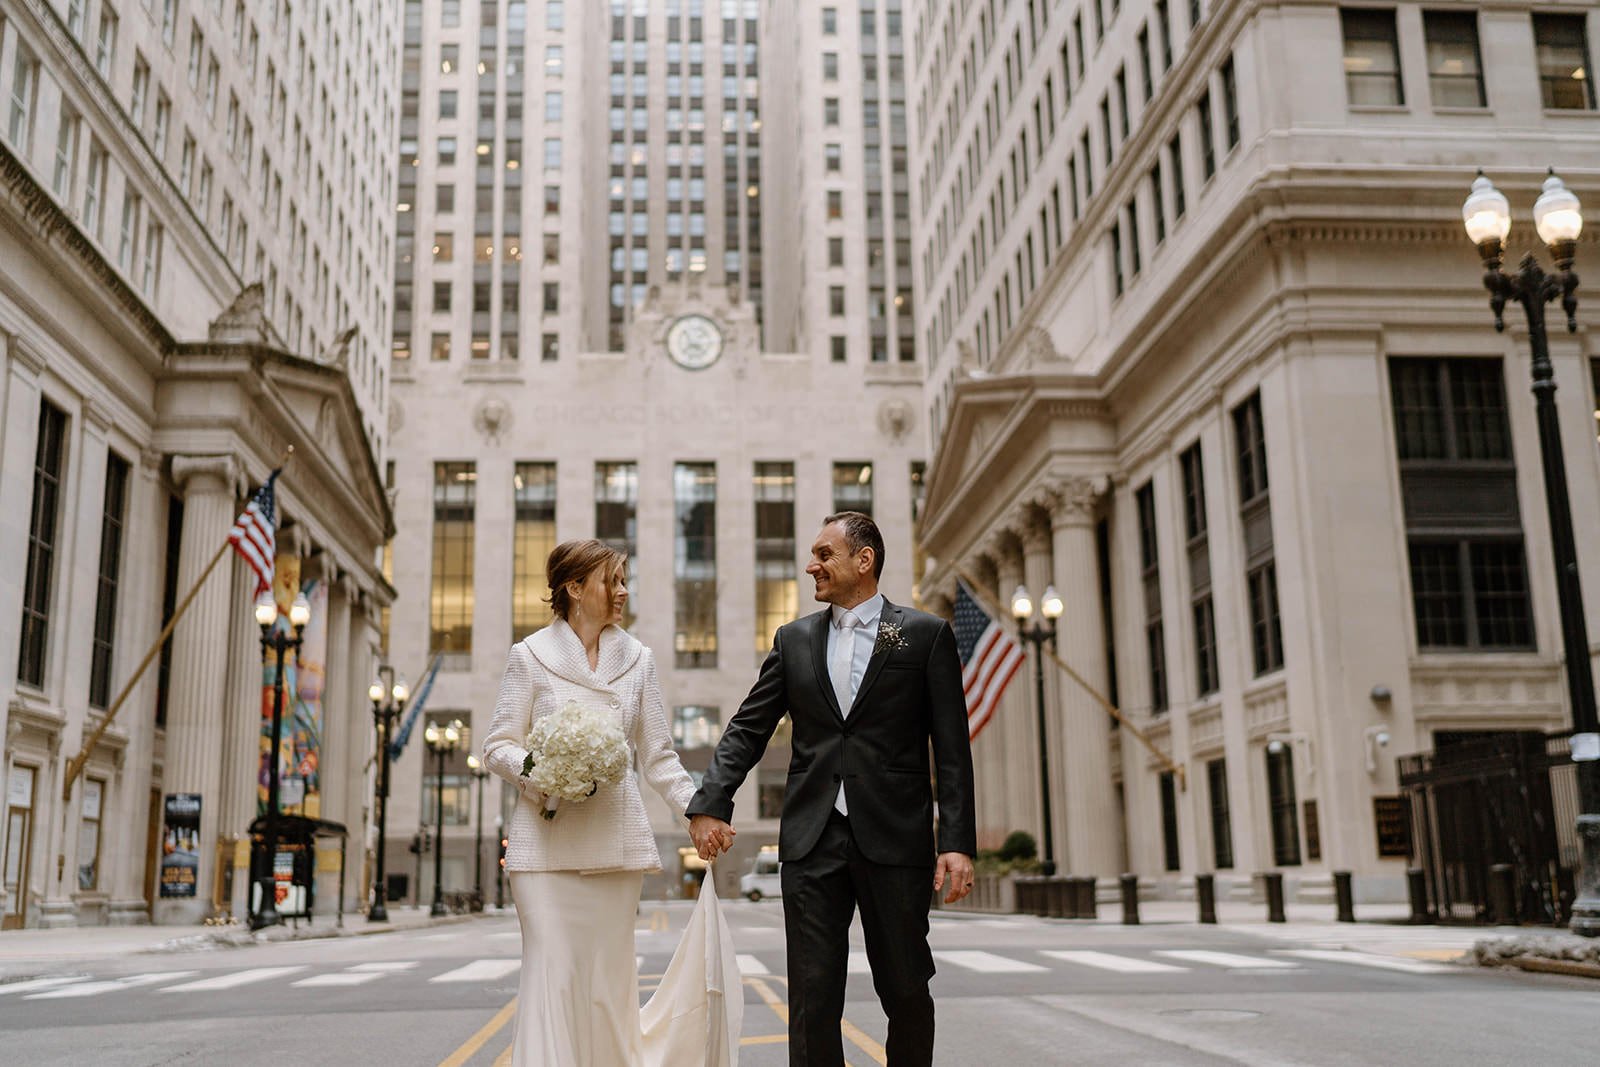 Newly-wed photos in front of the Chicago Board of Trade Building